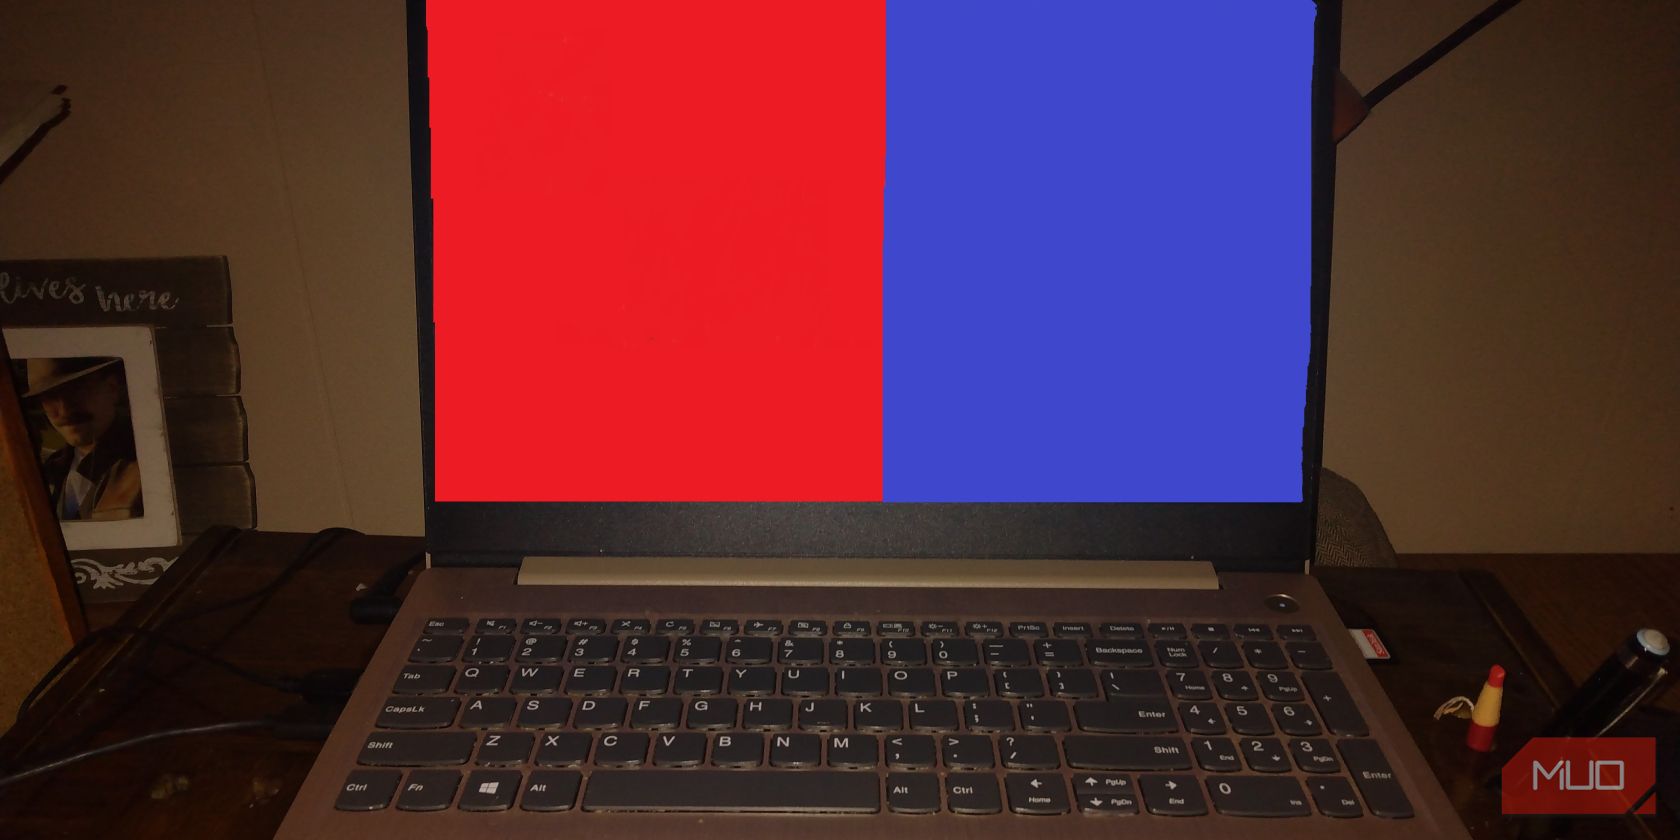 Laptop screen with one half red and one half blue